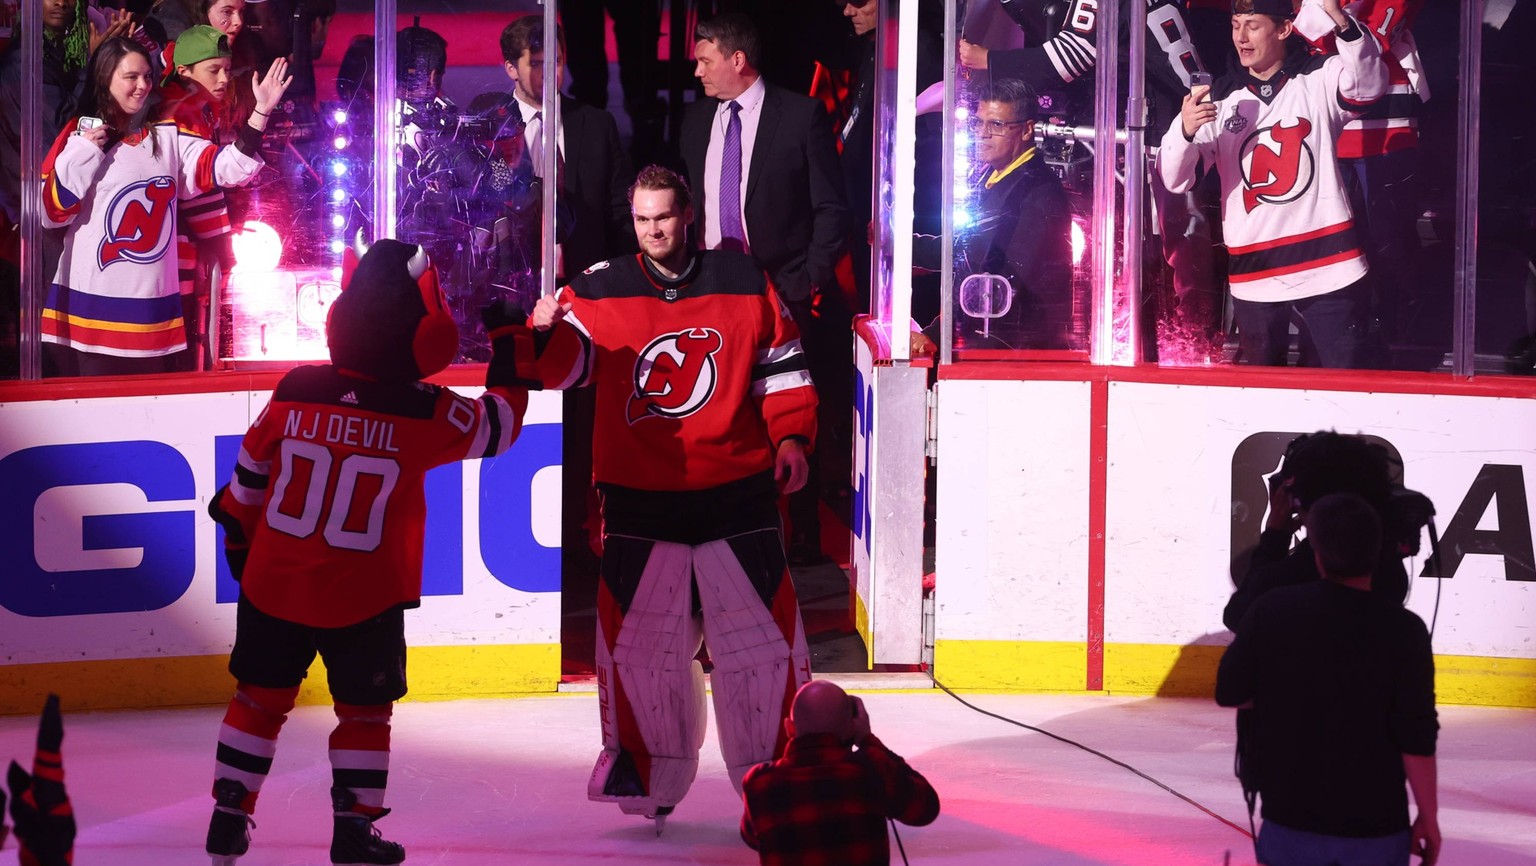 NHL, Eishockey Herren, USA Stanley Cup Playoffs-New York Rangers at New Jersey Devils May 1, 2023 Newark, New Jersey, USA New Jersey Devils goaltender Akira Schmid 40 is named first star against the N ...